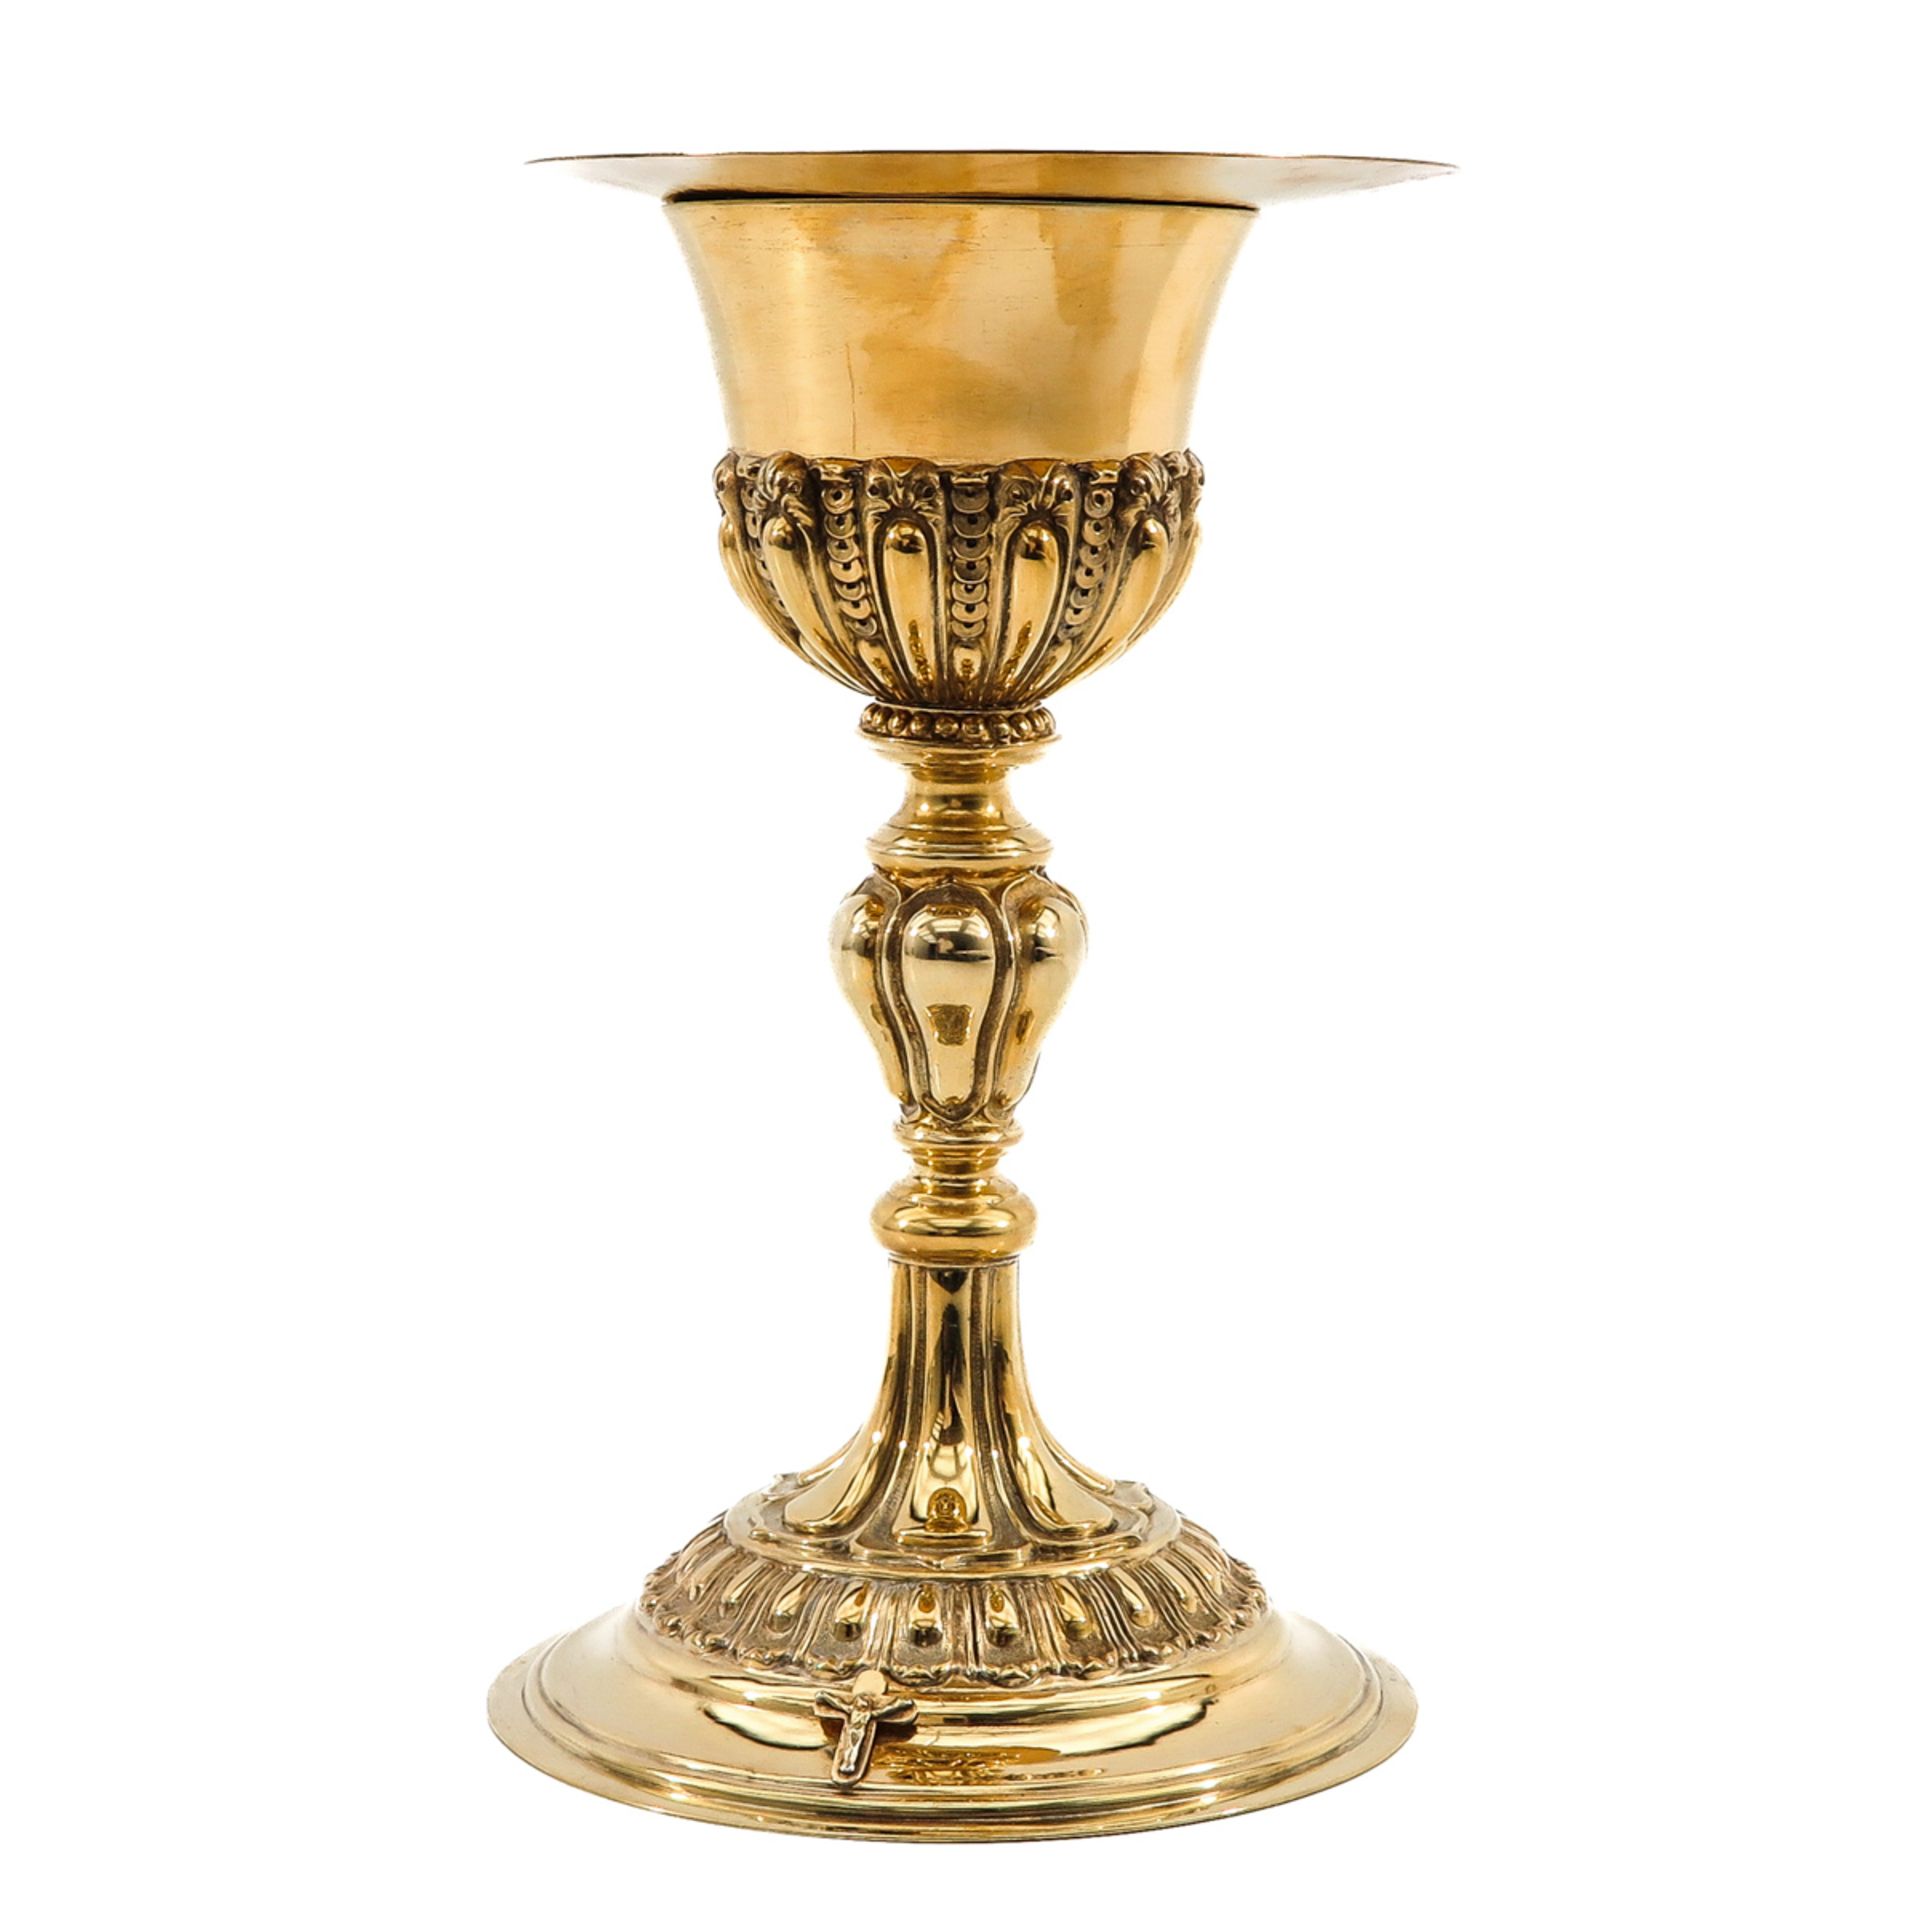 A Gold Plated Silver Chalice with Paten and Spoon - Image 4 of 10